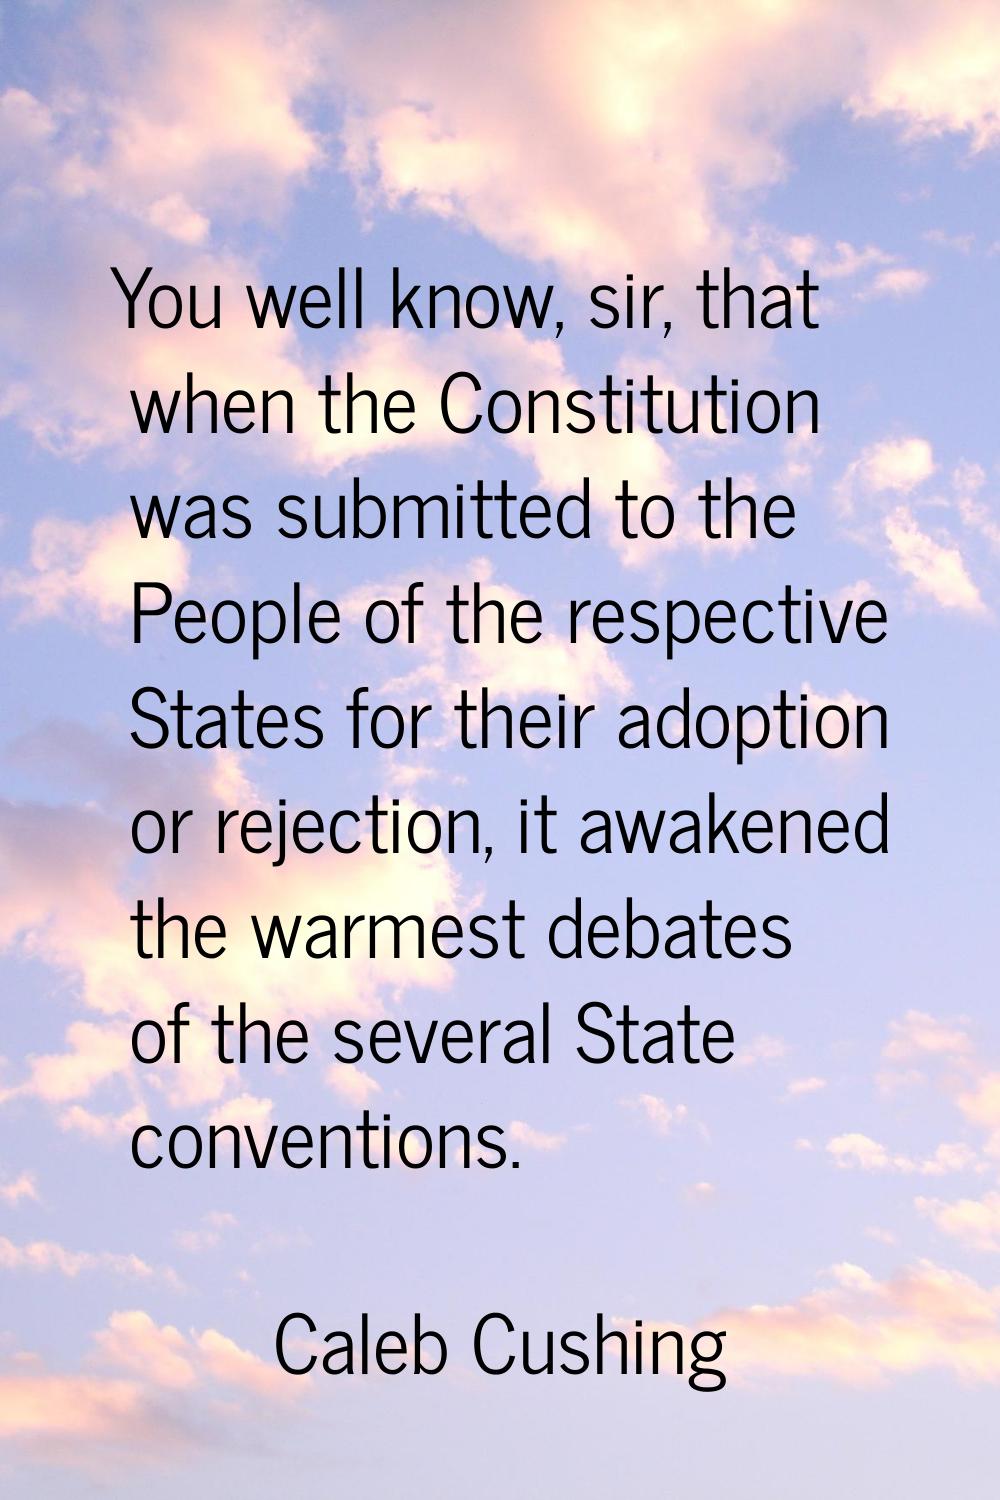 You well know, sir, that when the Constitution was submitted to the People of the respective States